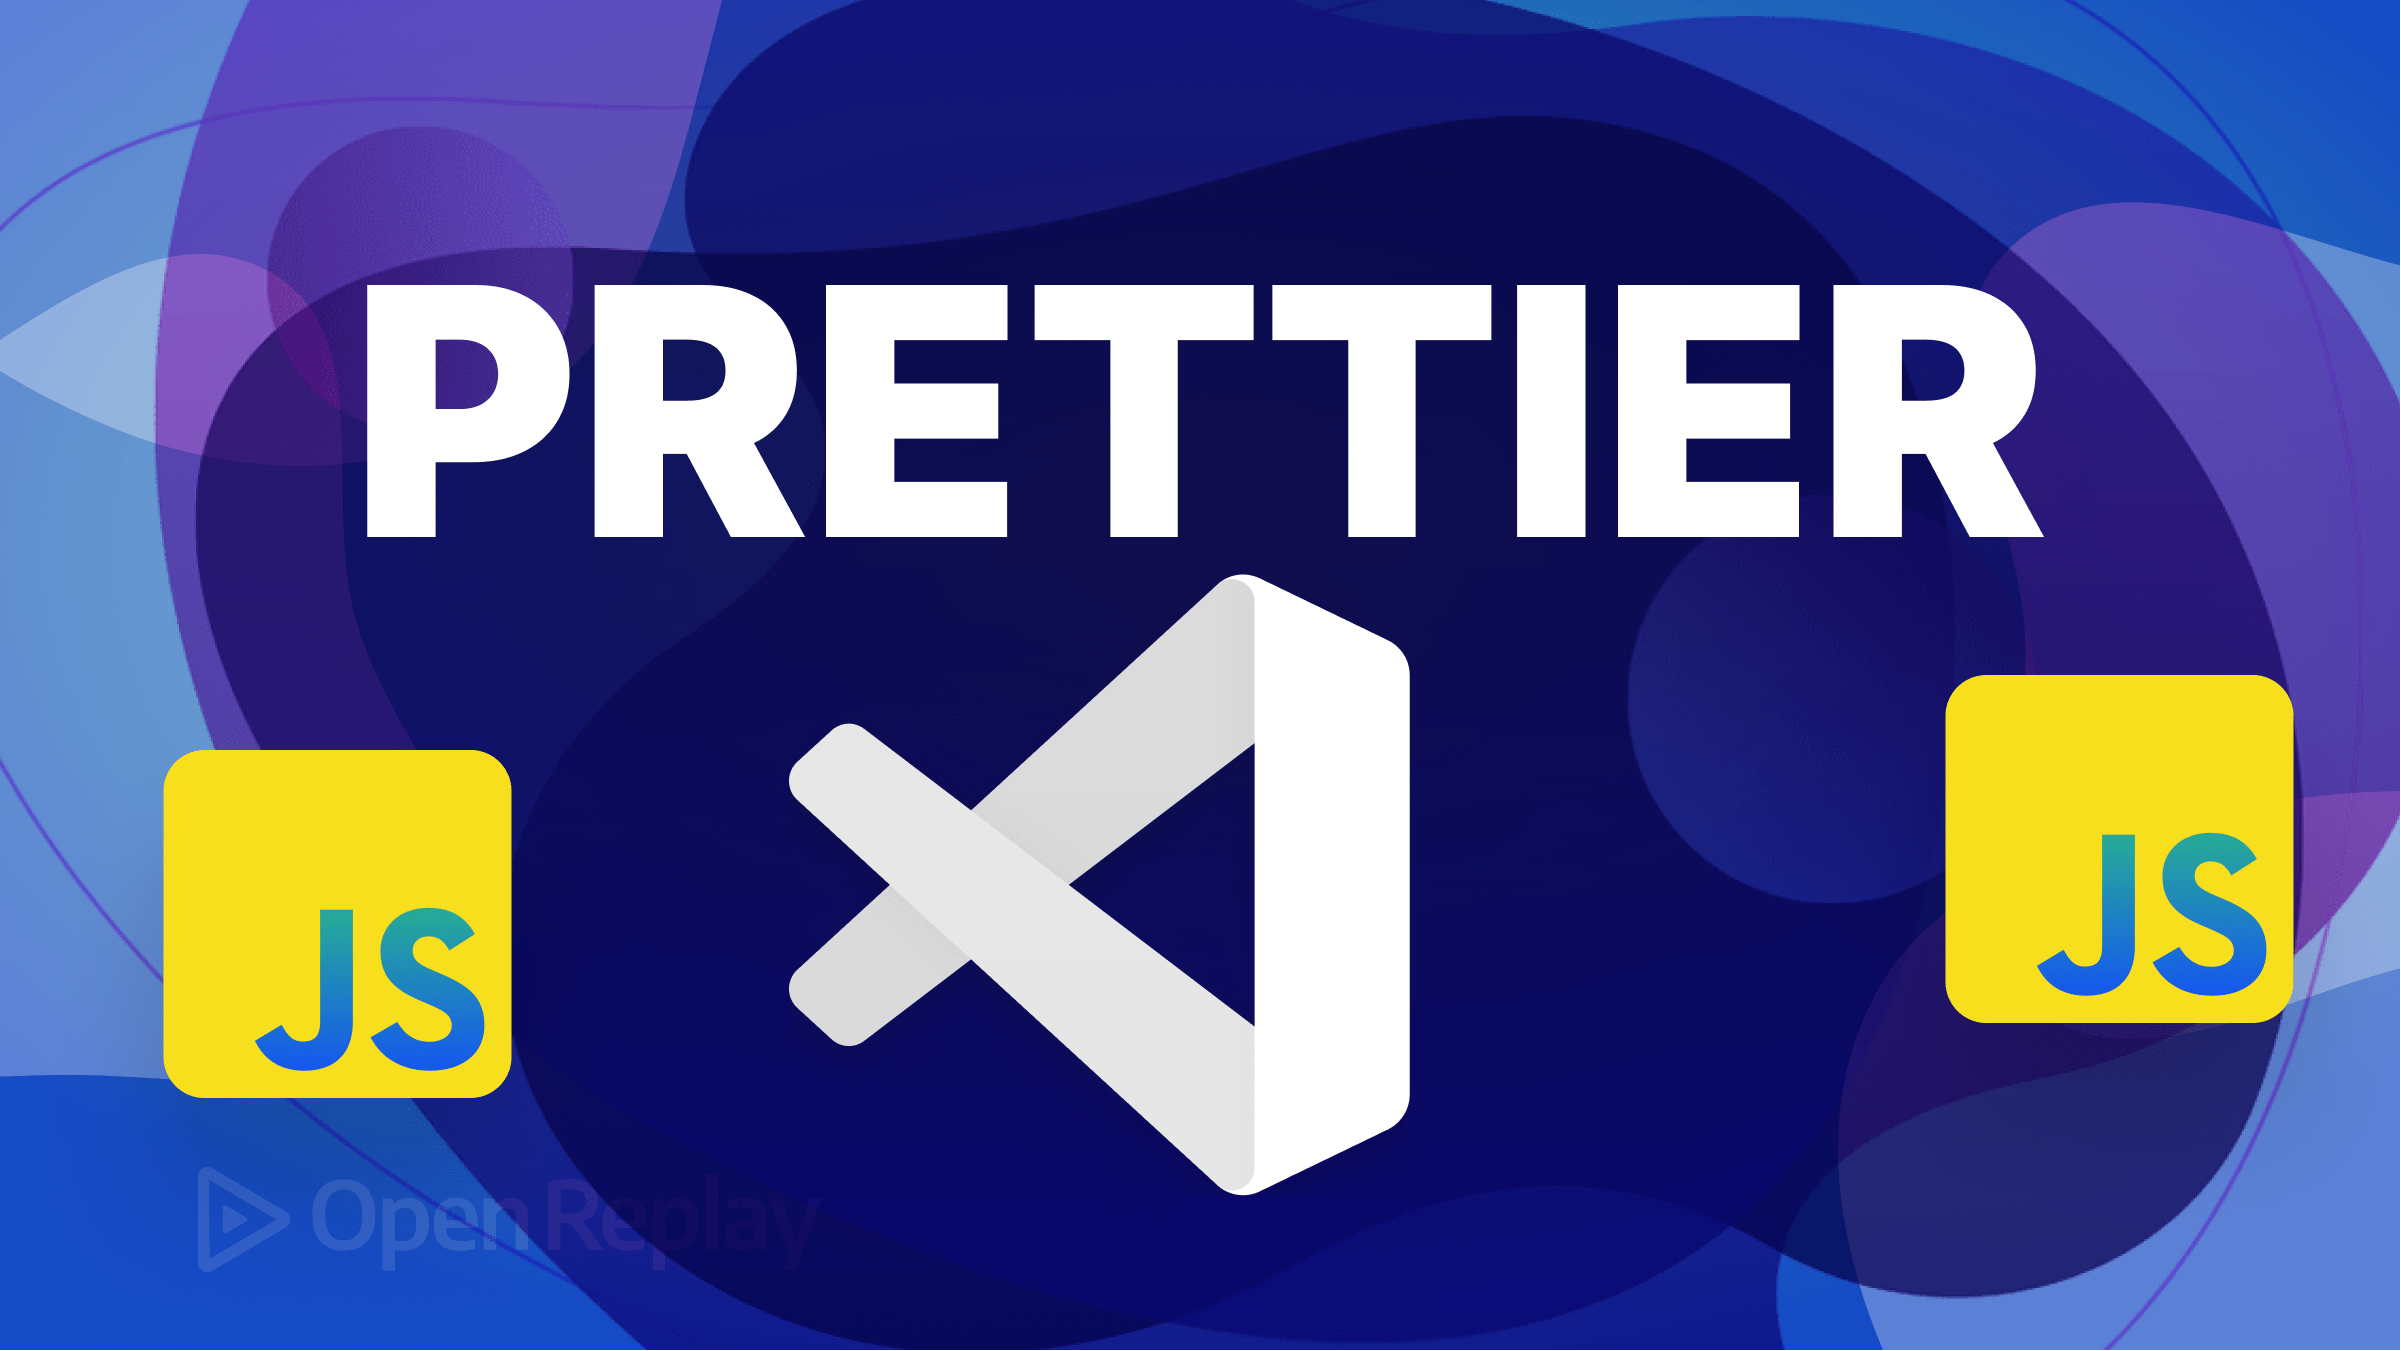 Using Prettier with VSCode to write JavaScript